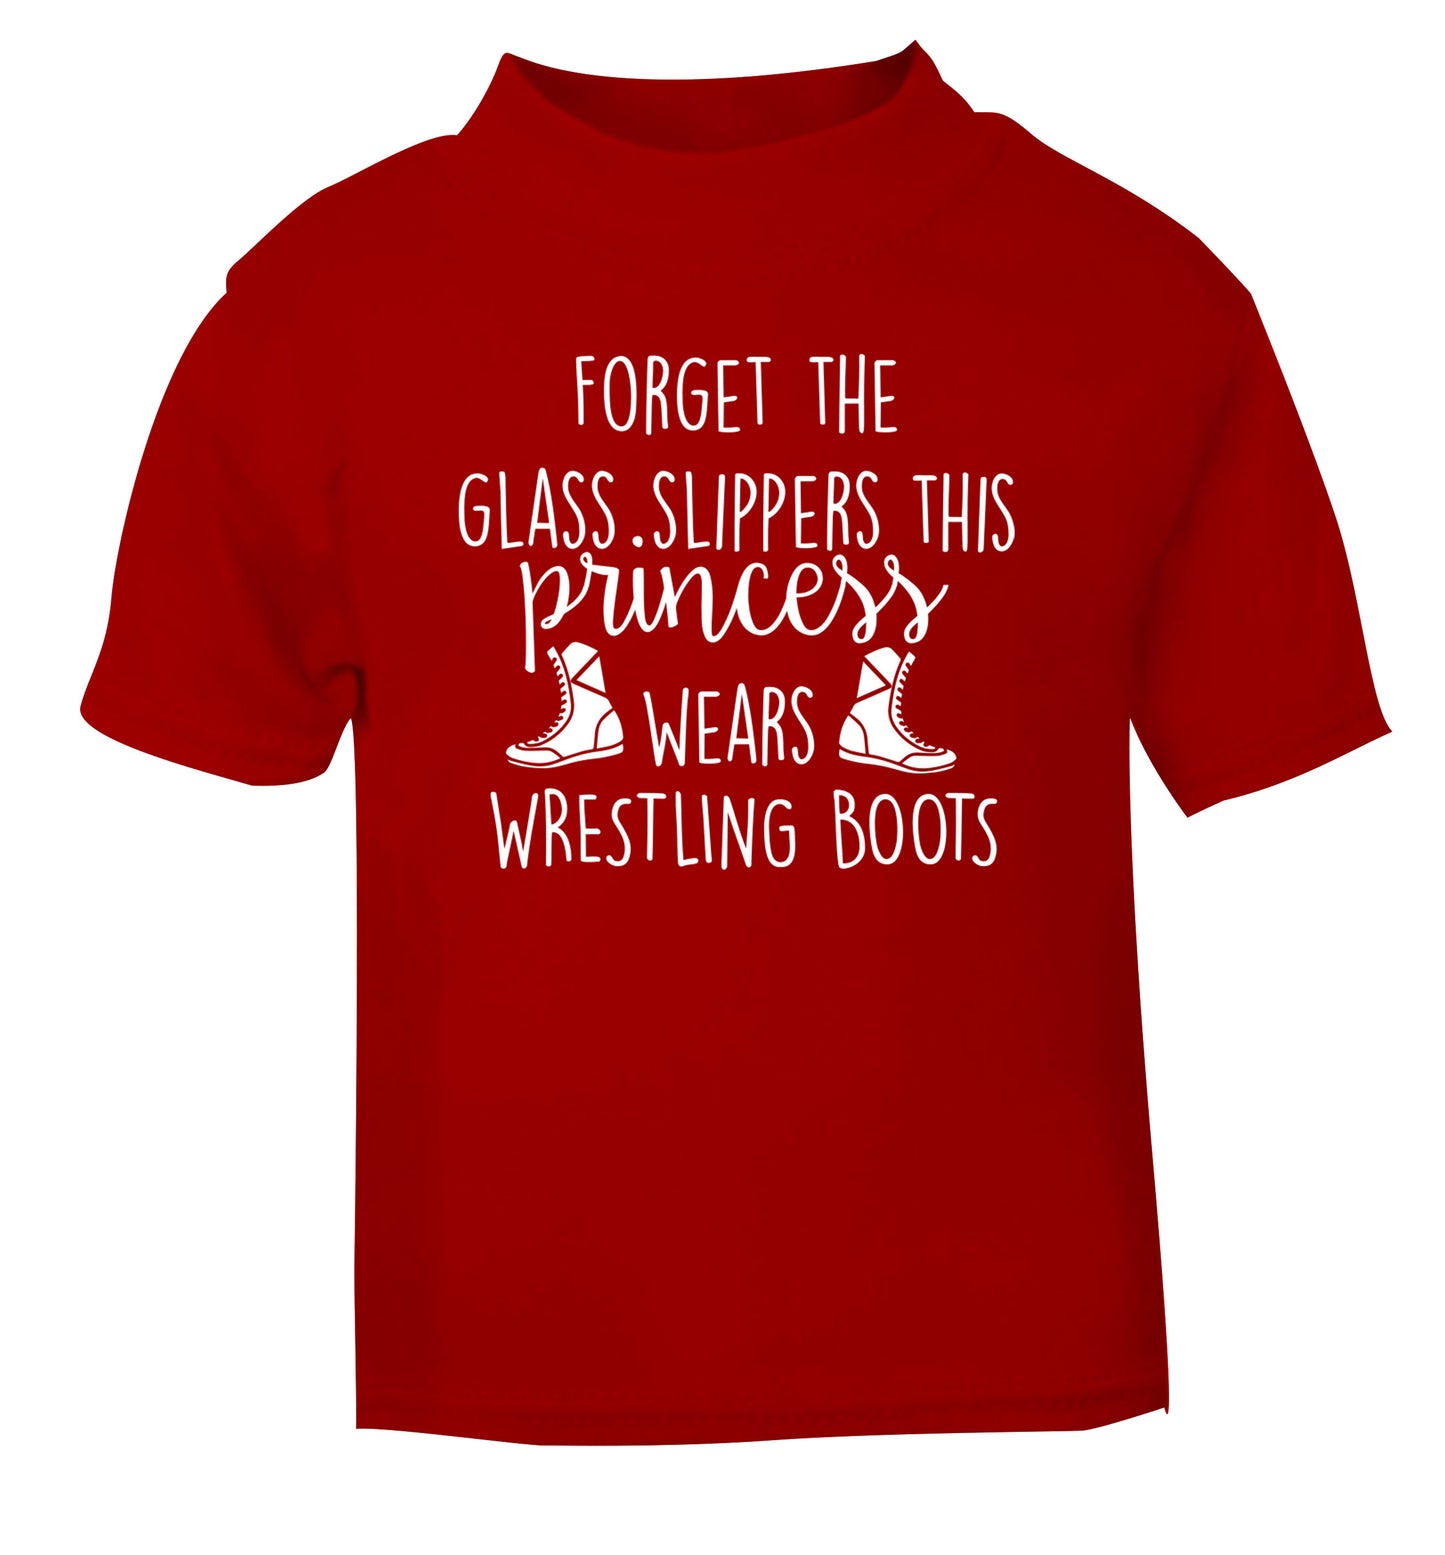 Forget the glass slippers this princess wears wrestling boots red Baby Toddler Tshirt 2 Years